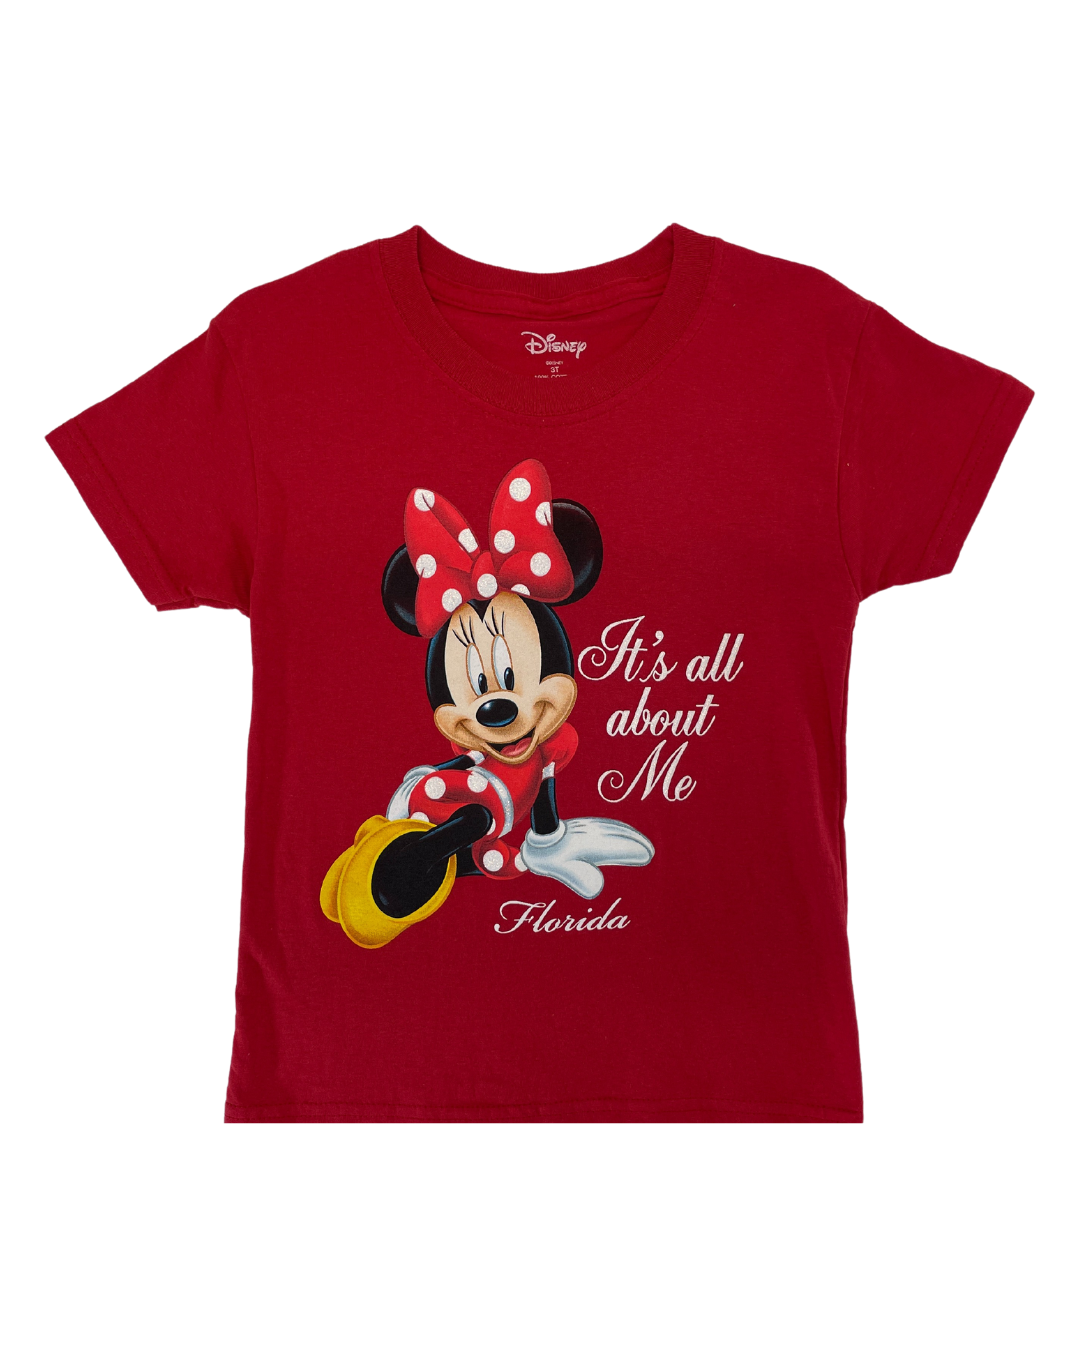 Disney Toddlers Minnie Mouse Florida "All About Me" Tee